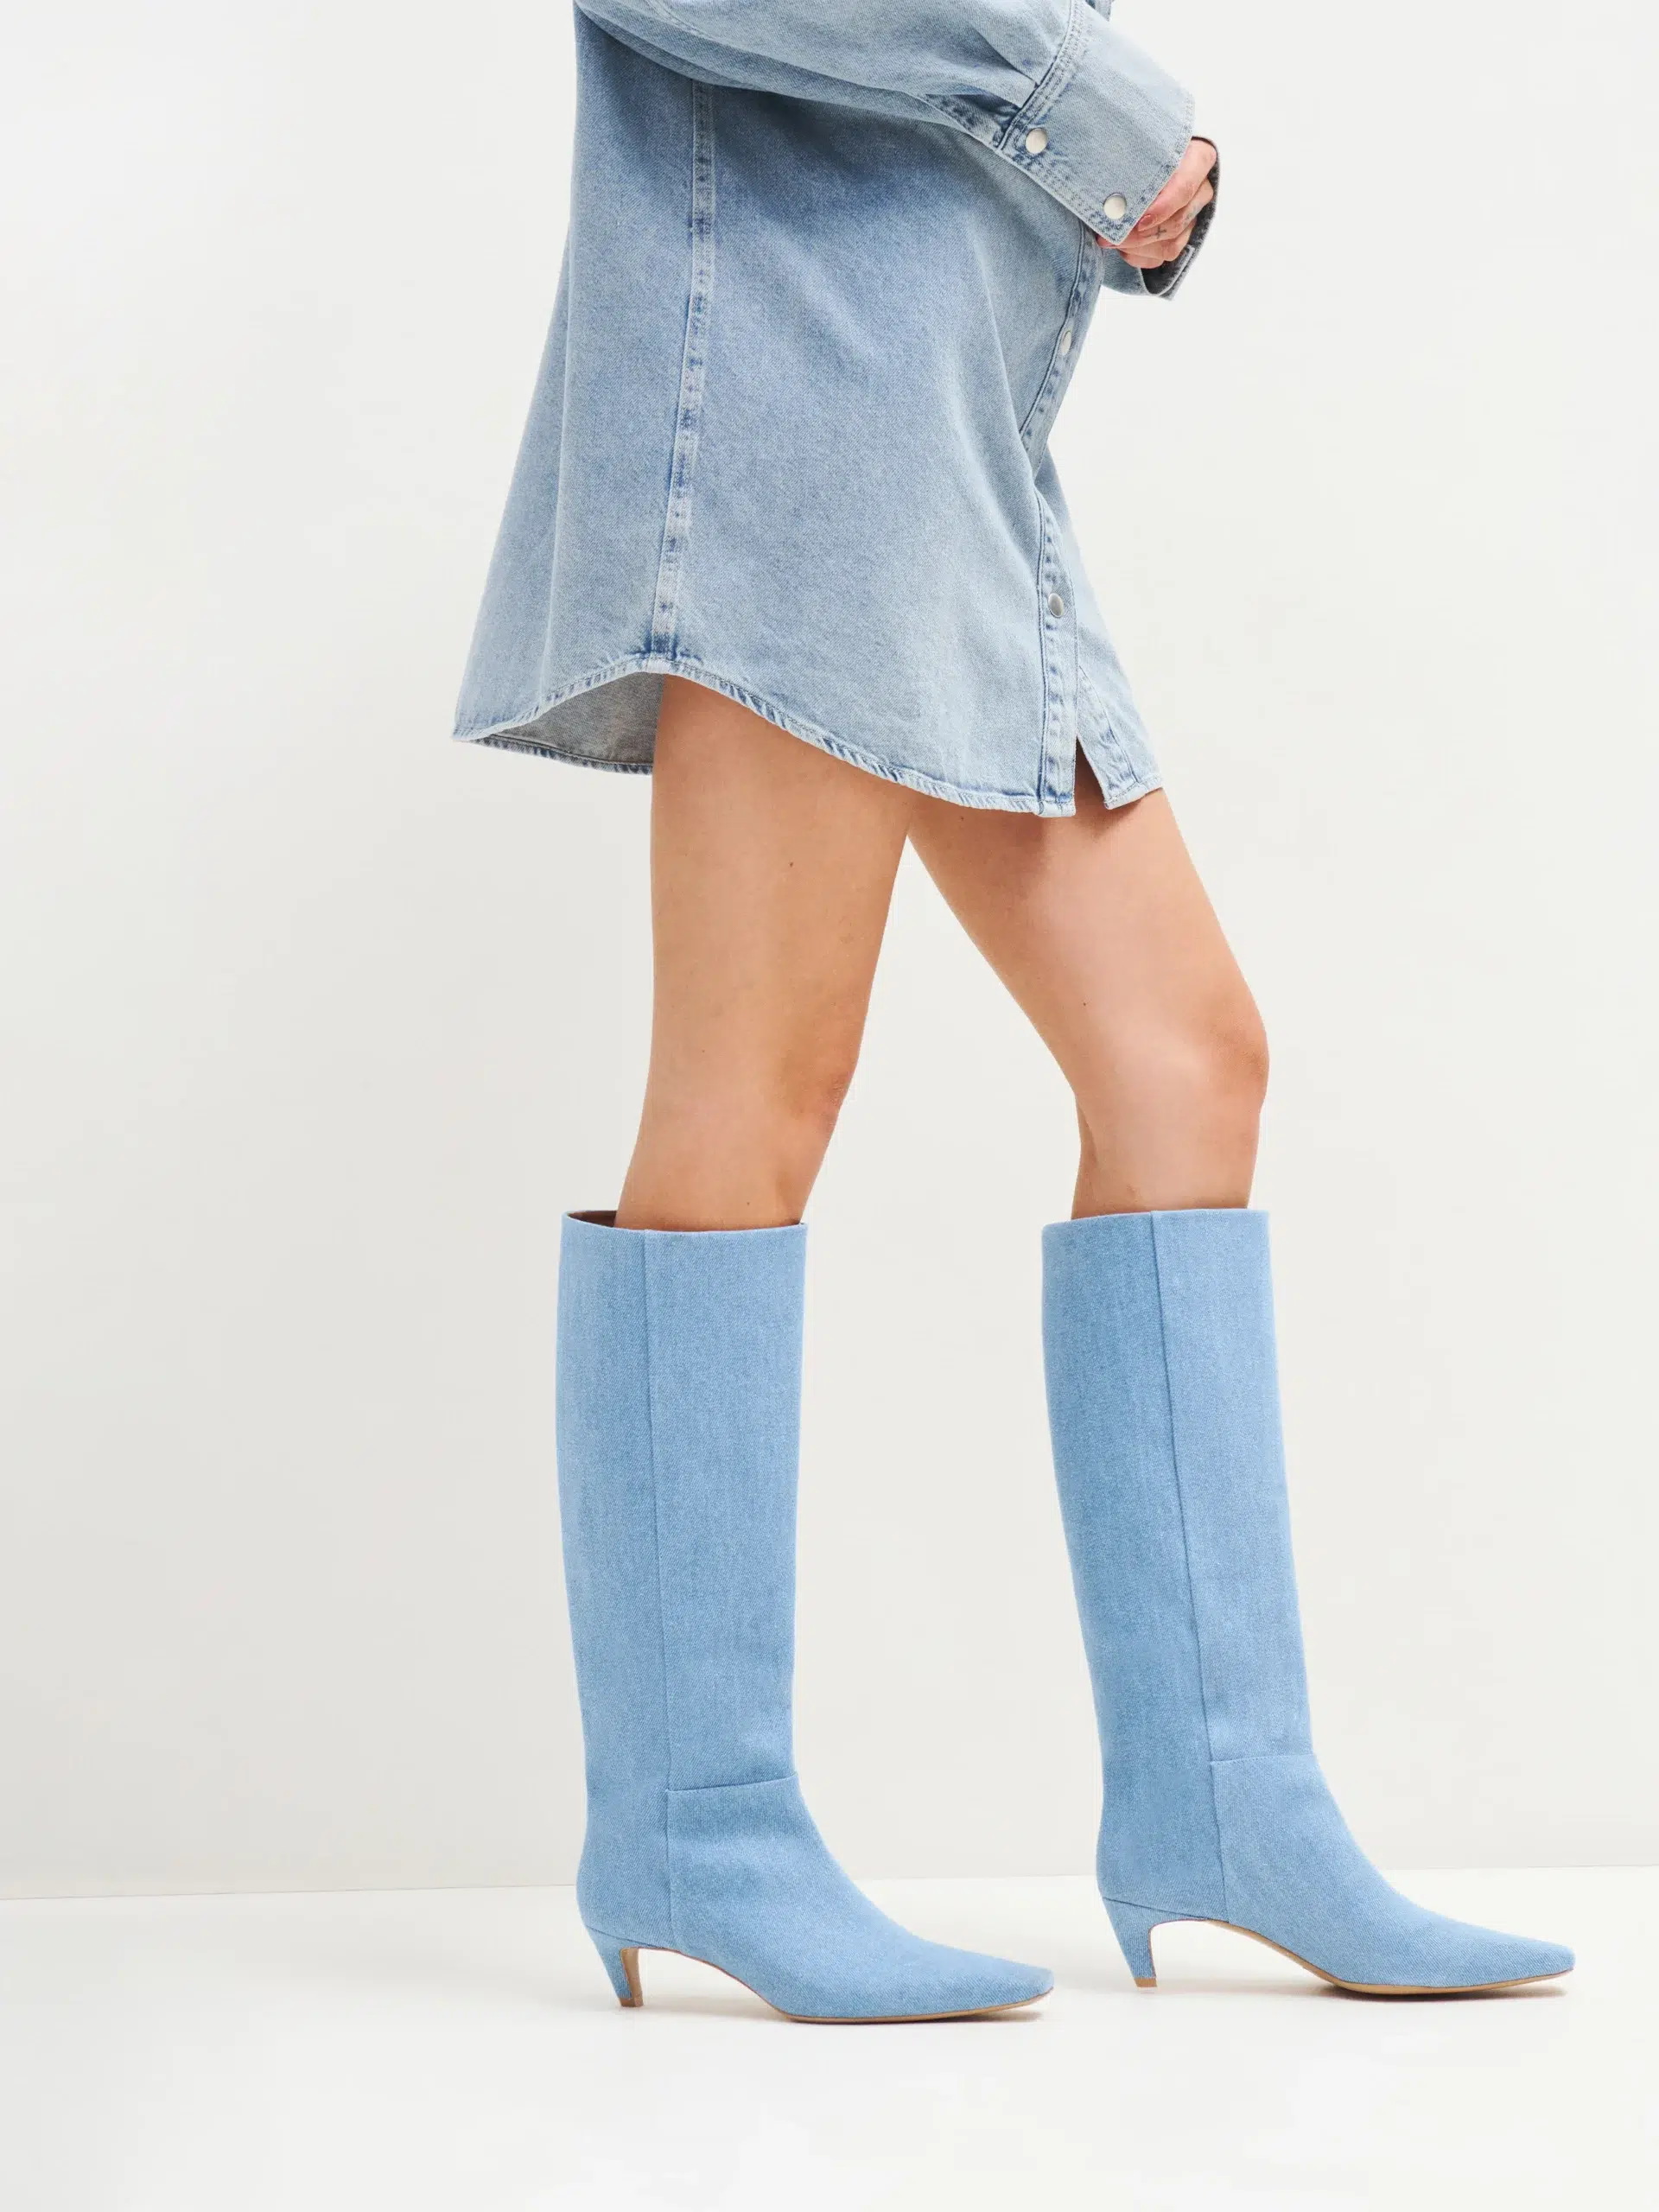 A model in denim Reformation boots. 